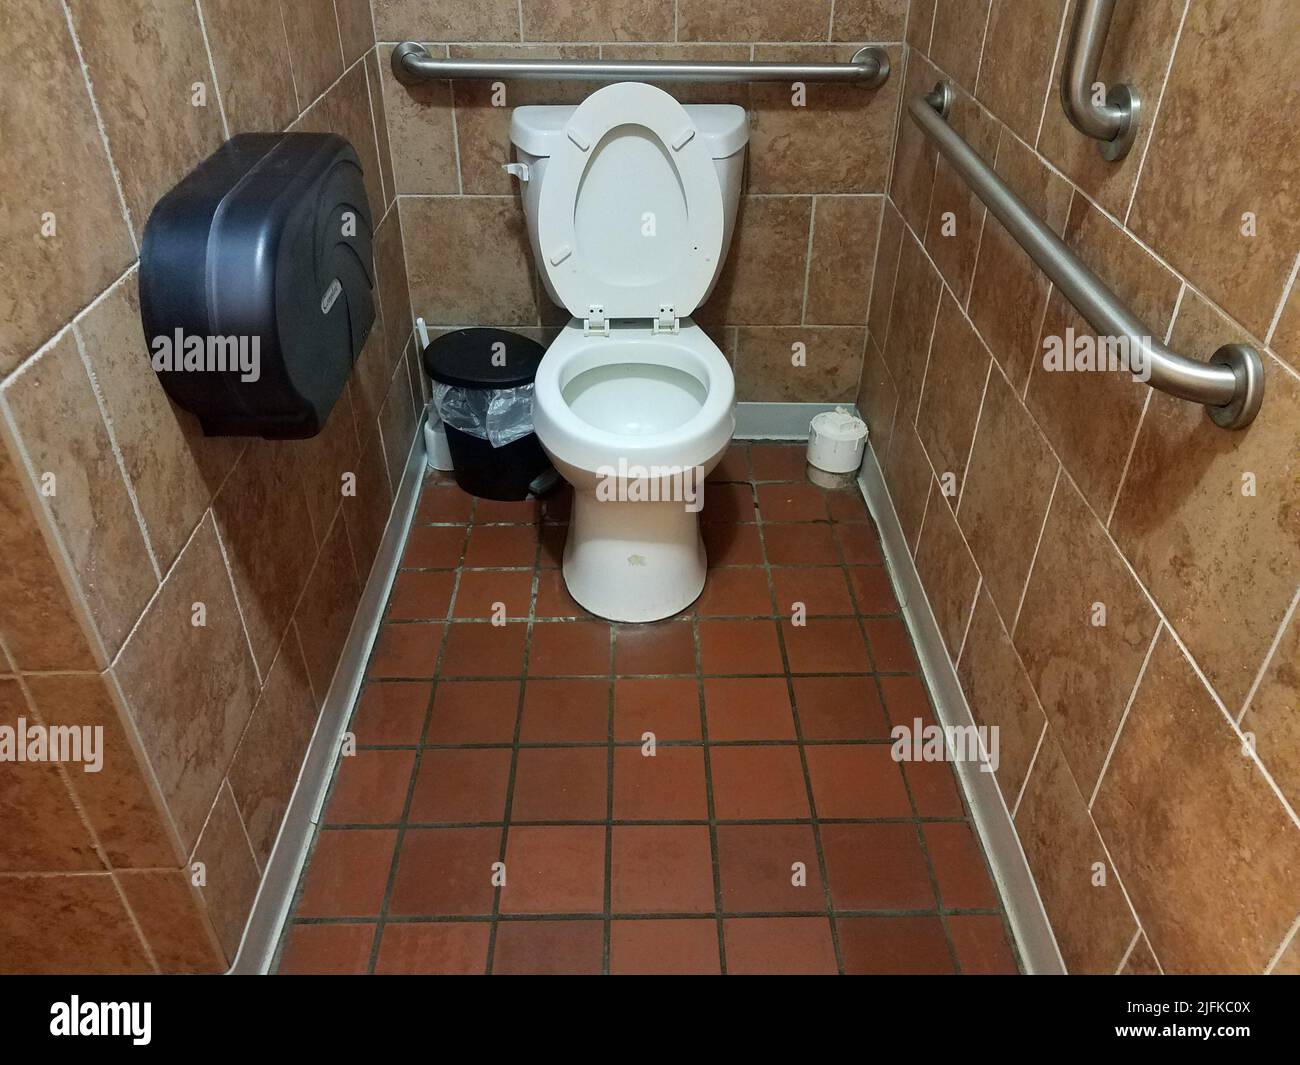 717 Men's Bathroom Stall Images, Stock Photos, 3D objects, & Vectors